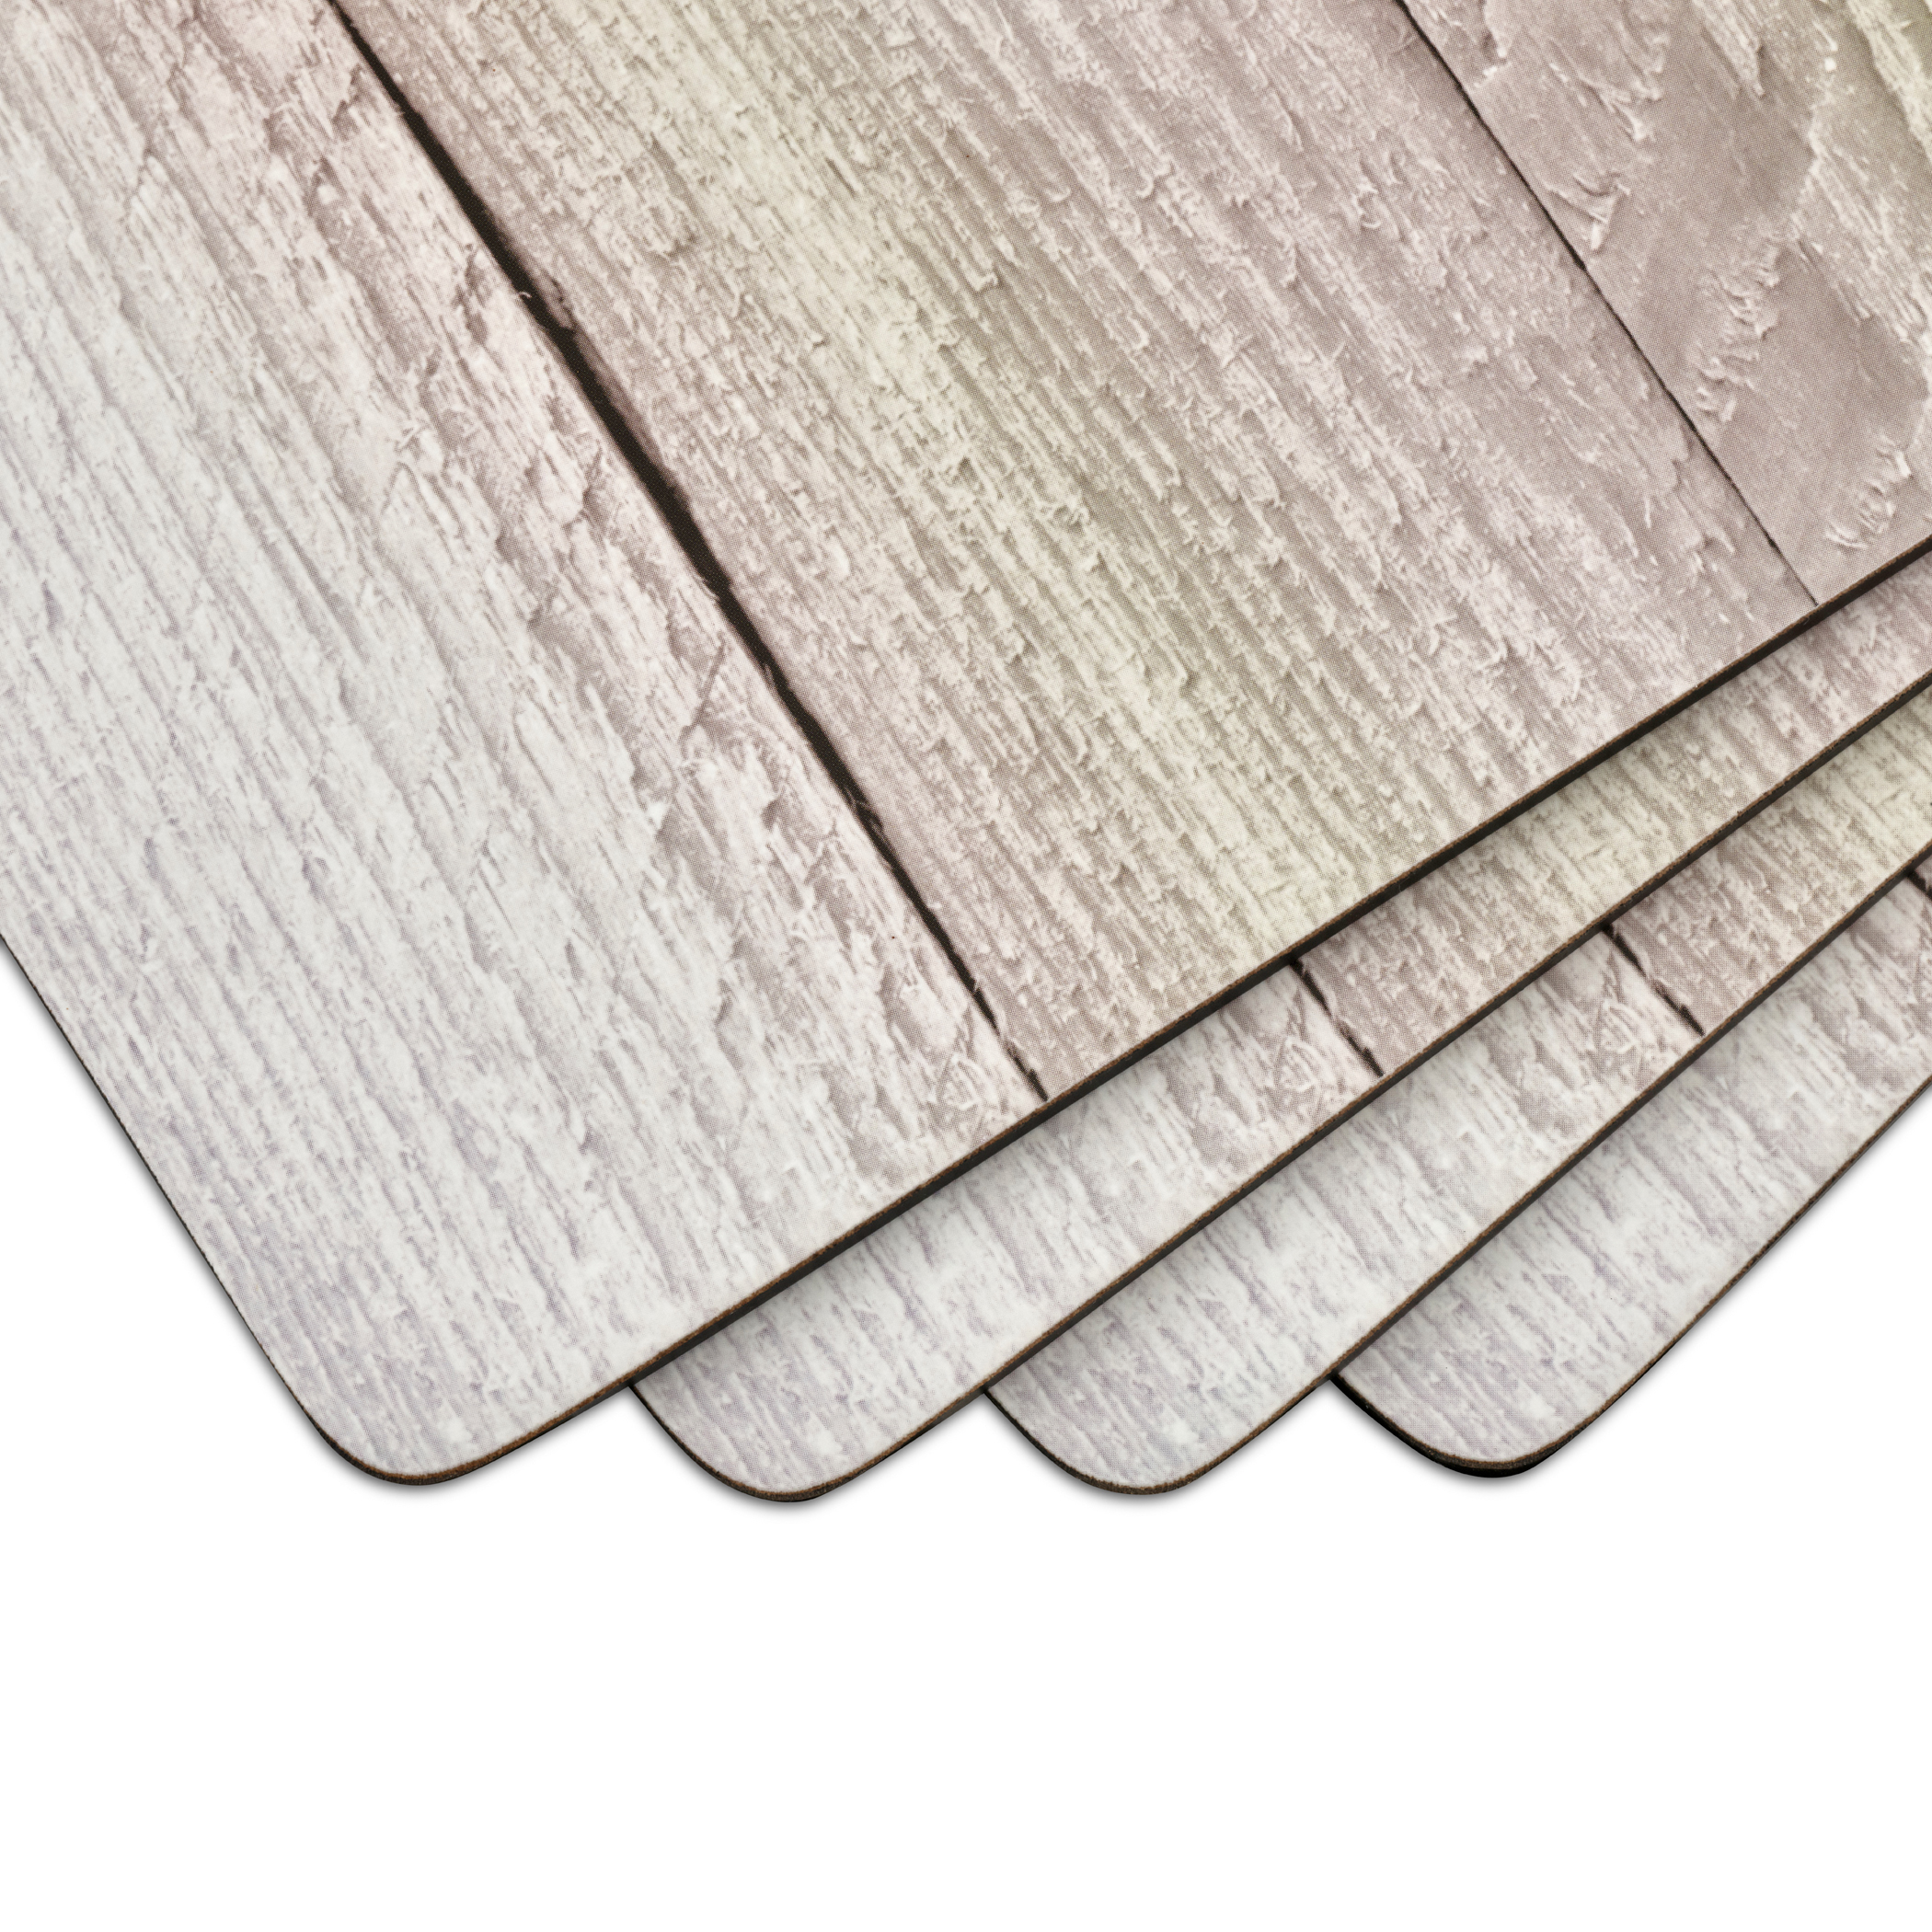 Driftwood Placemats Set of 4 image number null